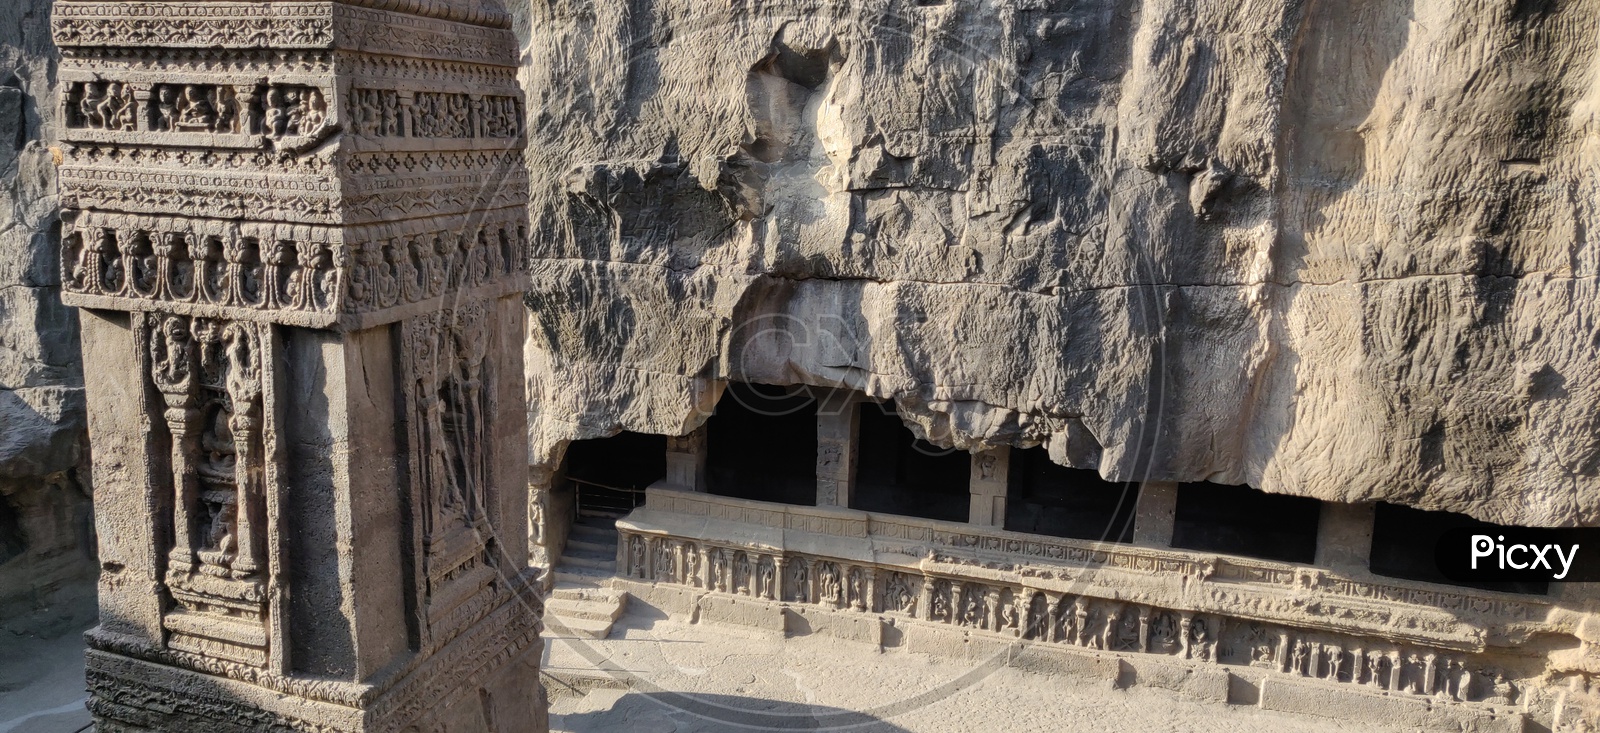 Architecture Of  Ajanta Caves With Stone Carves Pillars And Designs On Them